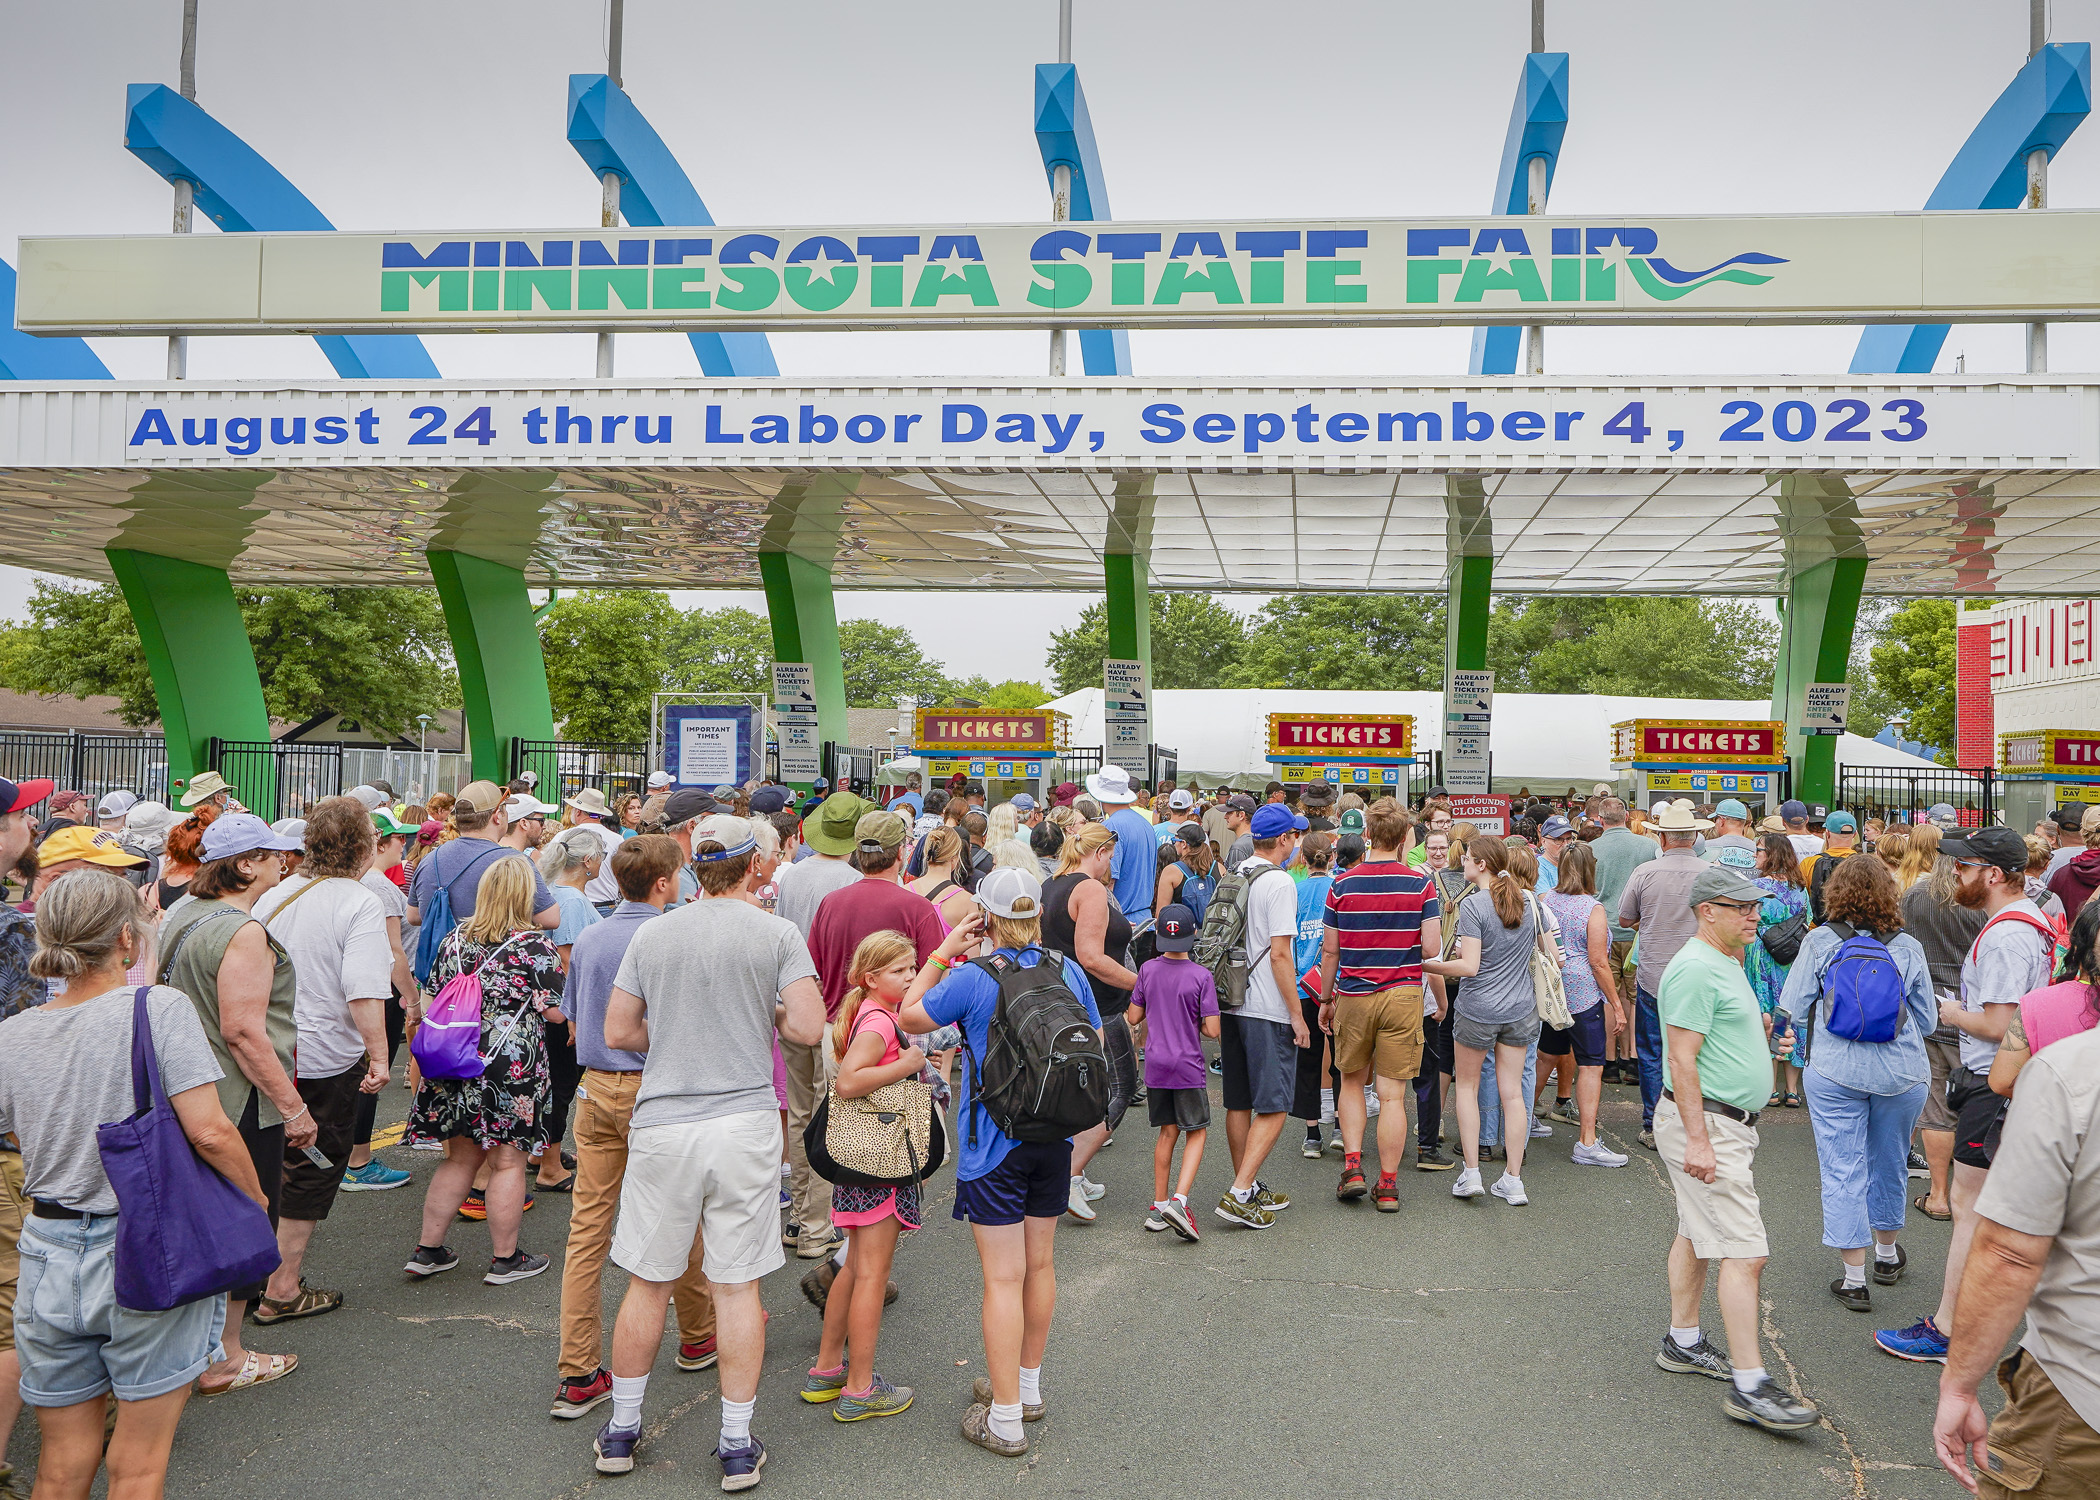 More than 8,100 fairgoers voted in this year's informal, unscientific poll conducted by the nonpartisan House Public Information Services Office at the Minnesota State Fair. (Photo by Andrew VonBank)